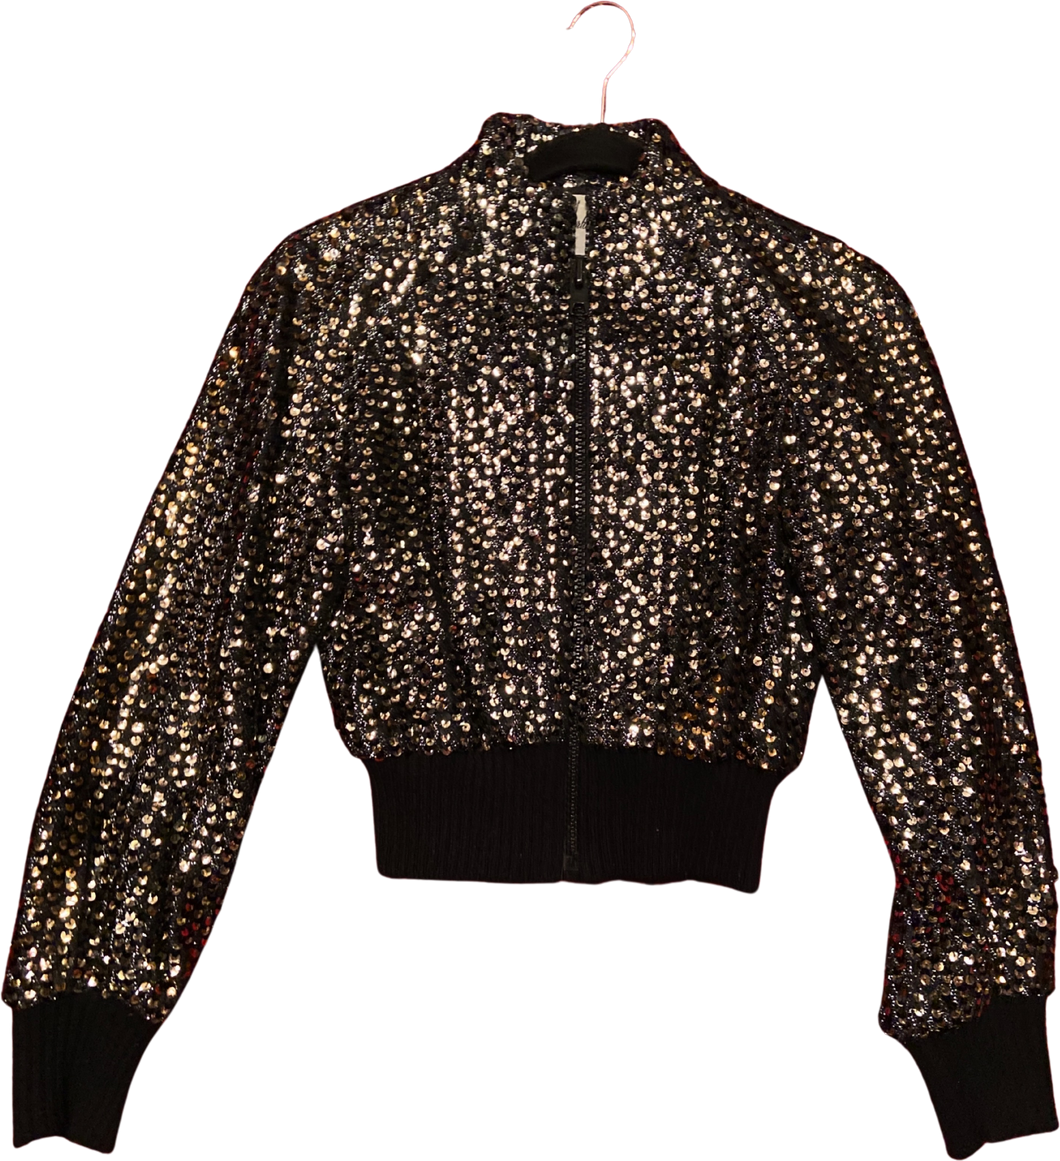 70s/80s Iconic Blk/svr/gold Sequin Embellish Bling Jacket By Isabell Gerhart